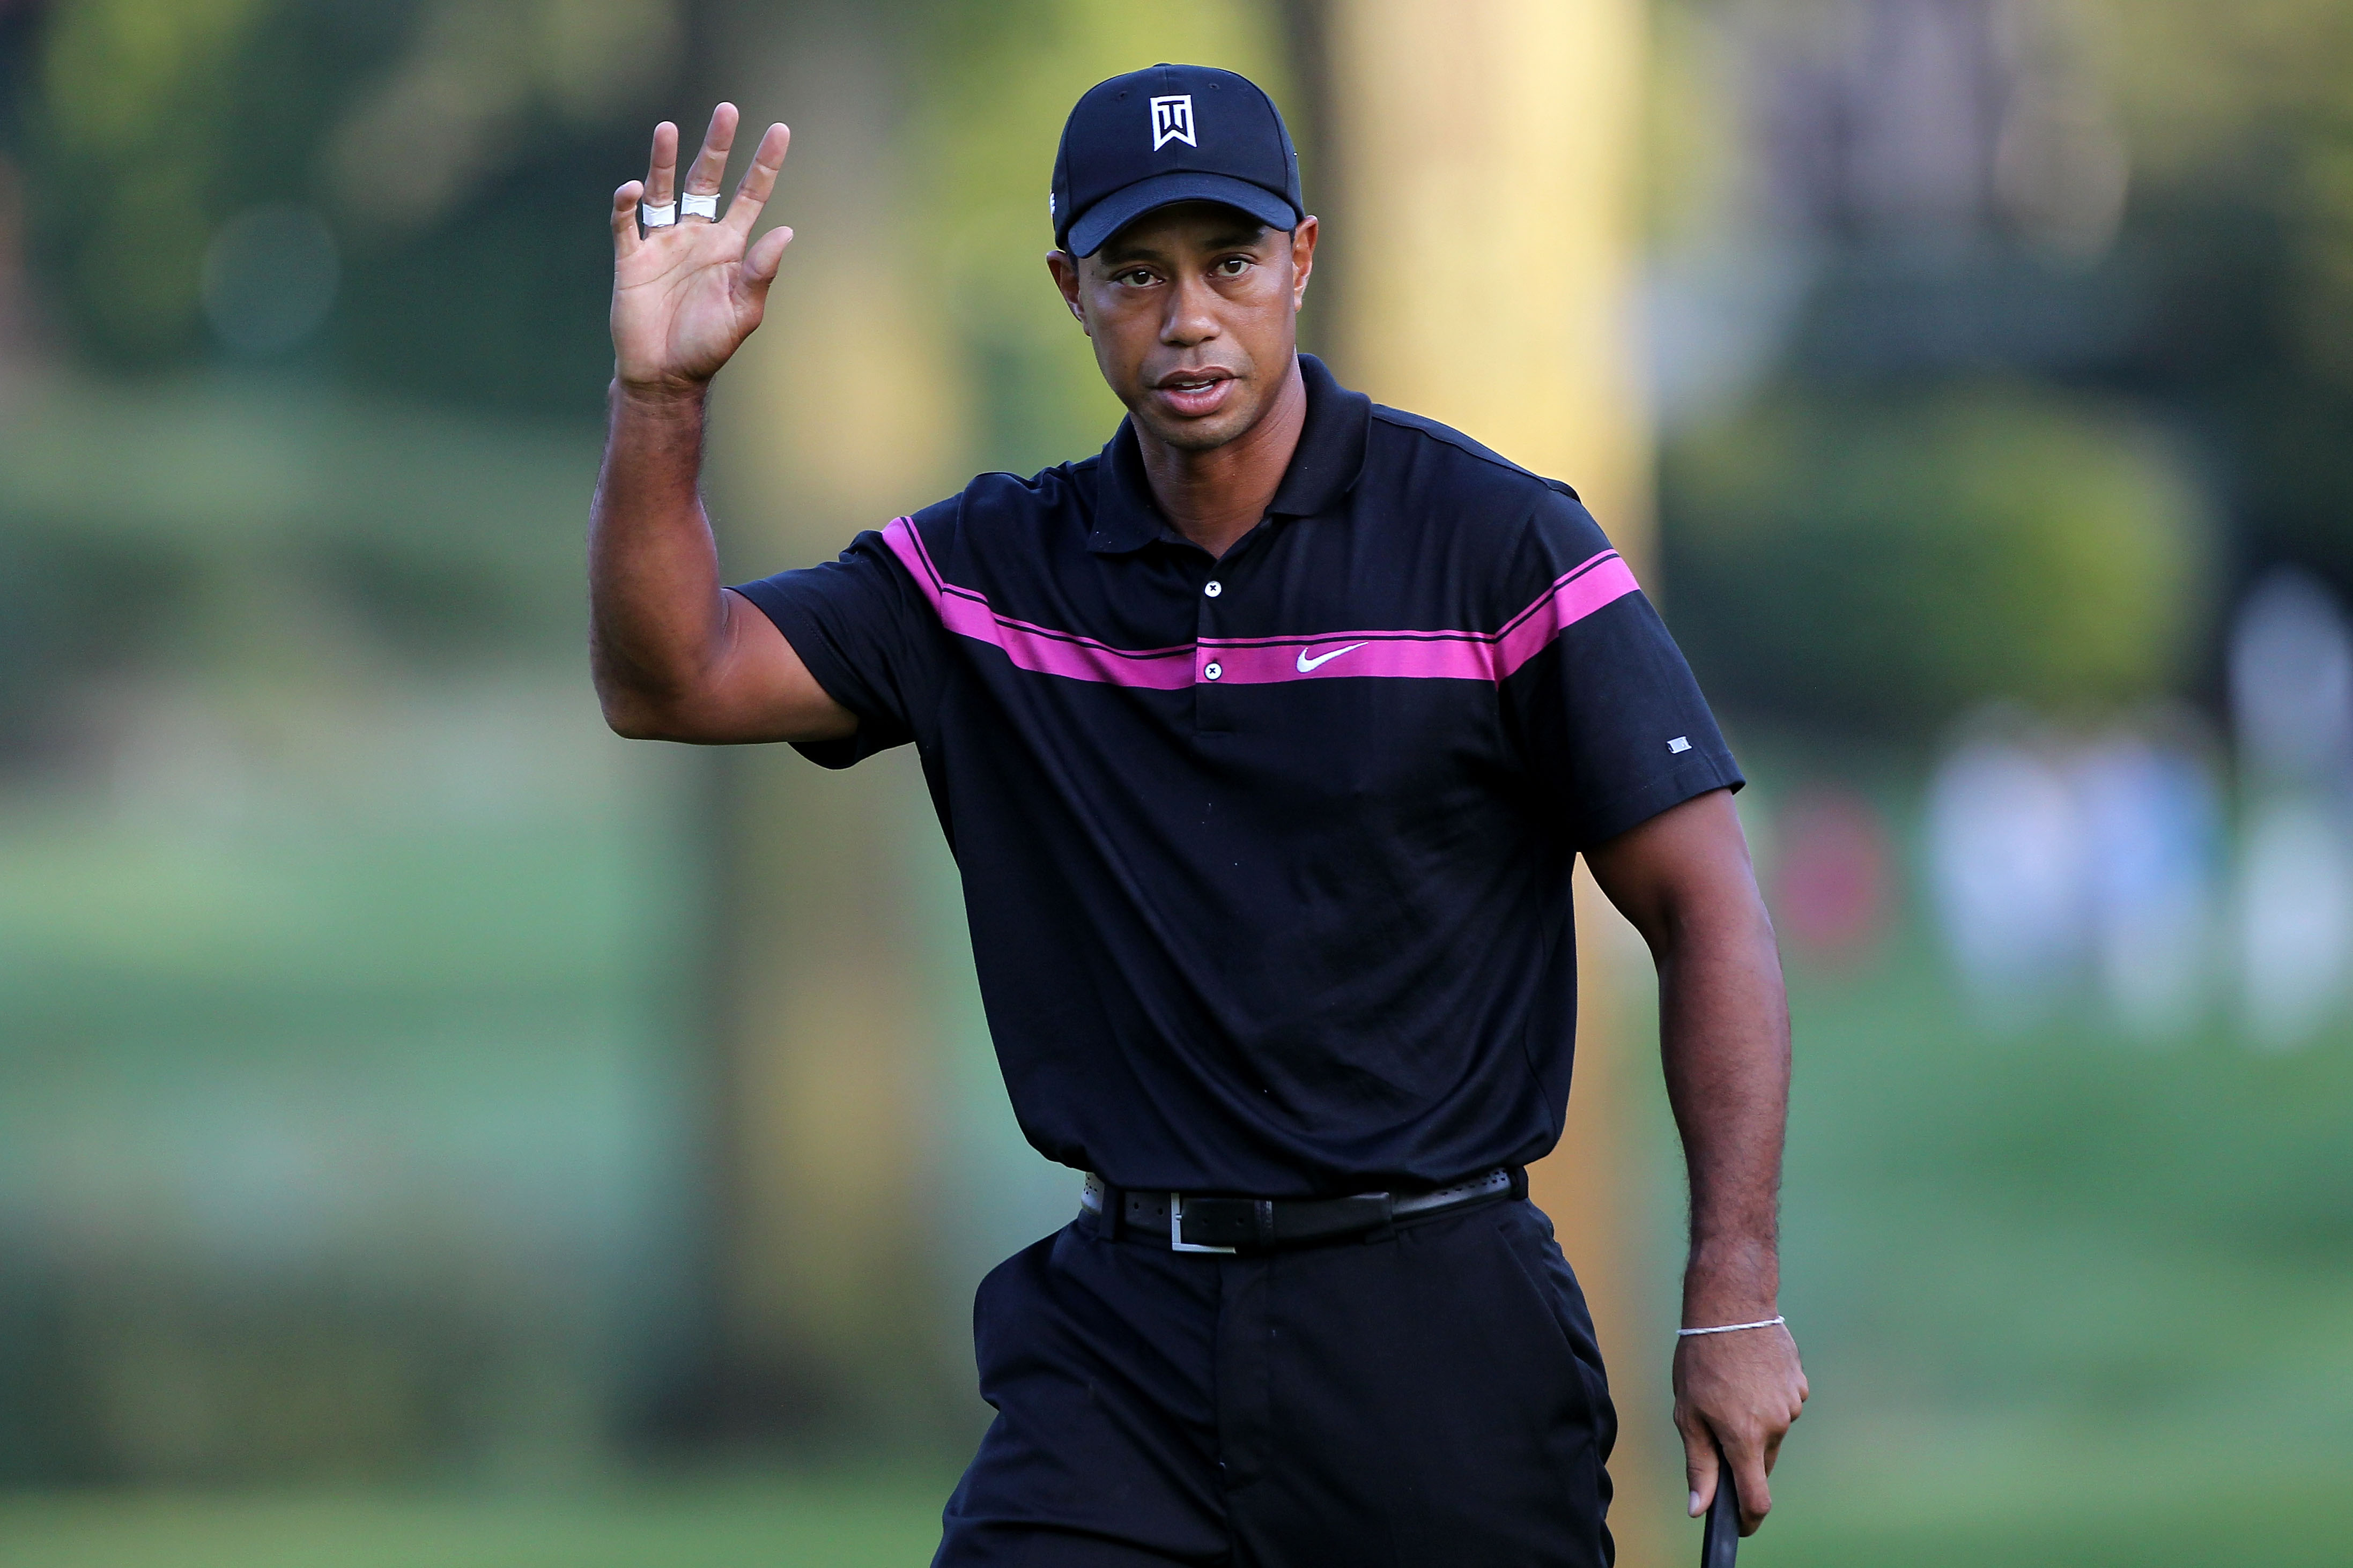 Barclays Golf Results: Tiger Woods Storms Out of the Gate in First ...